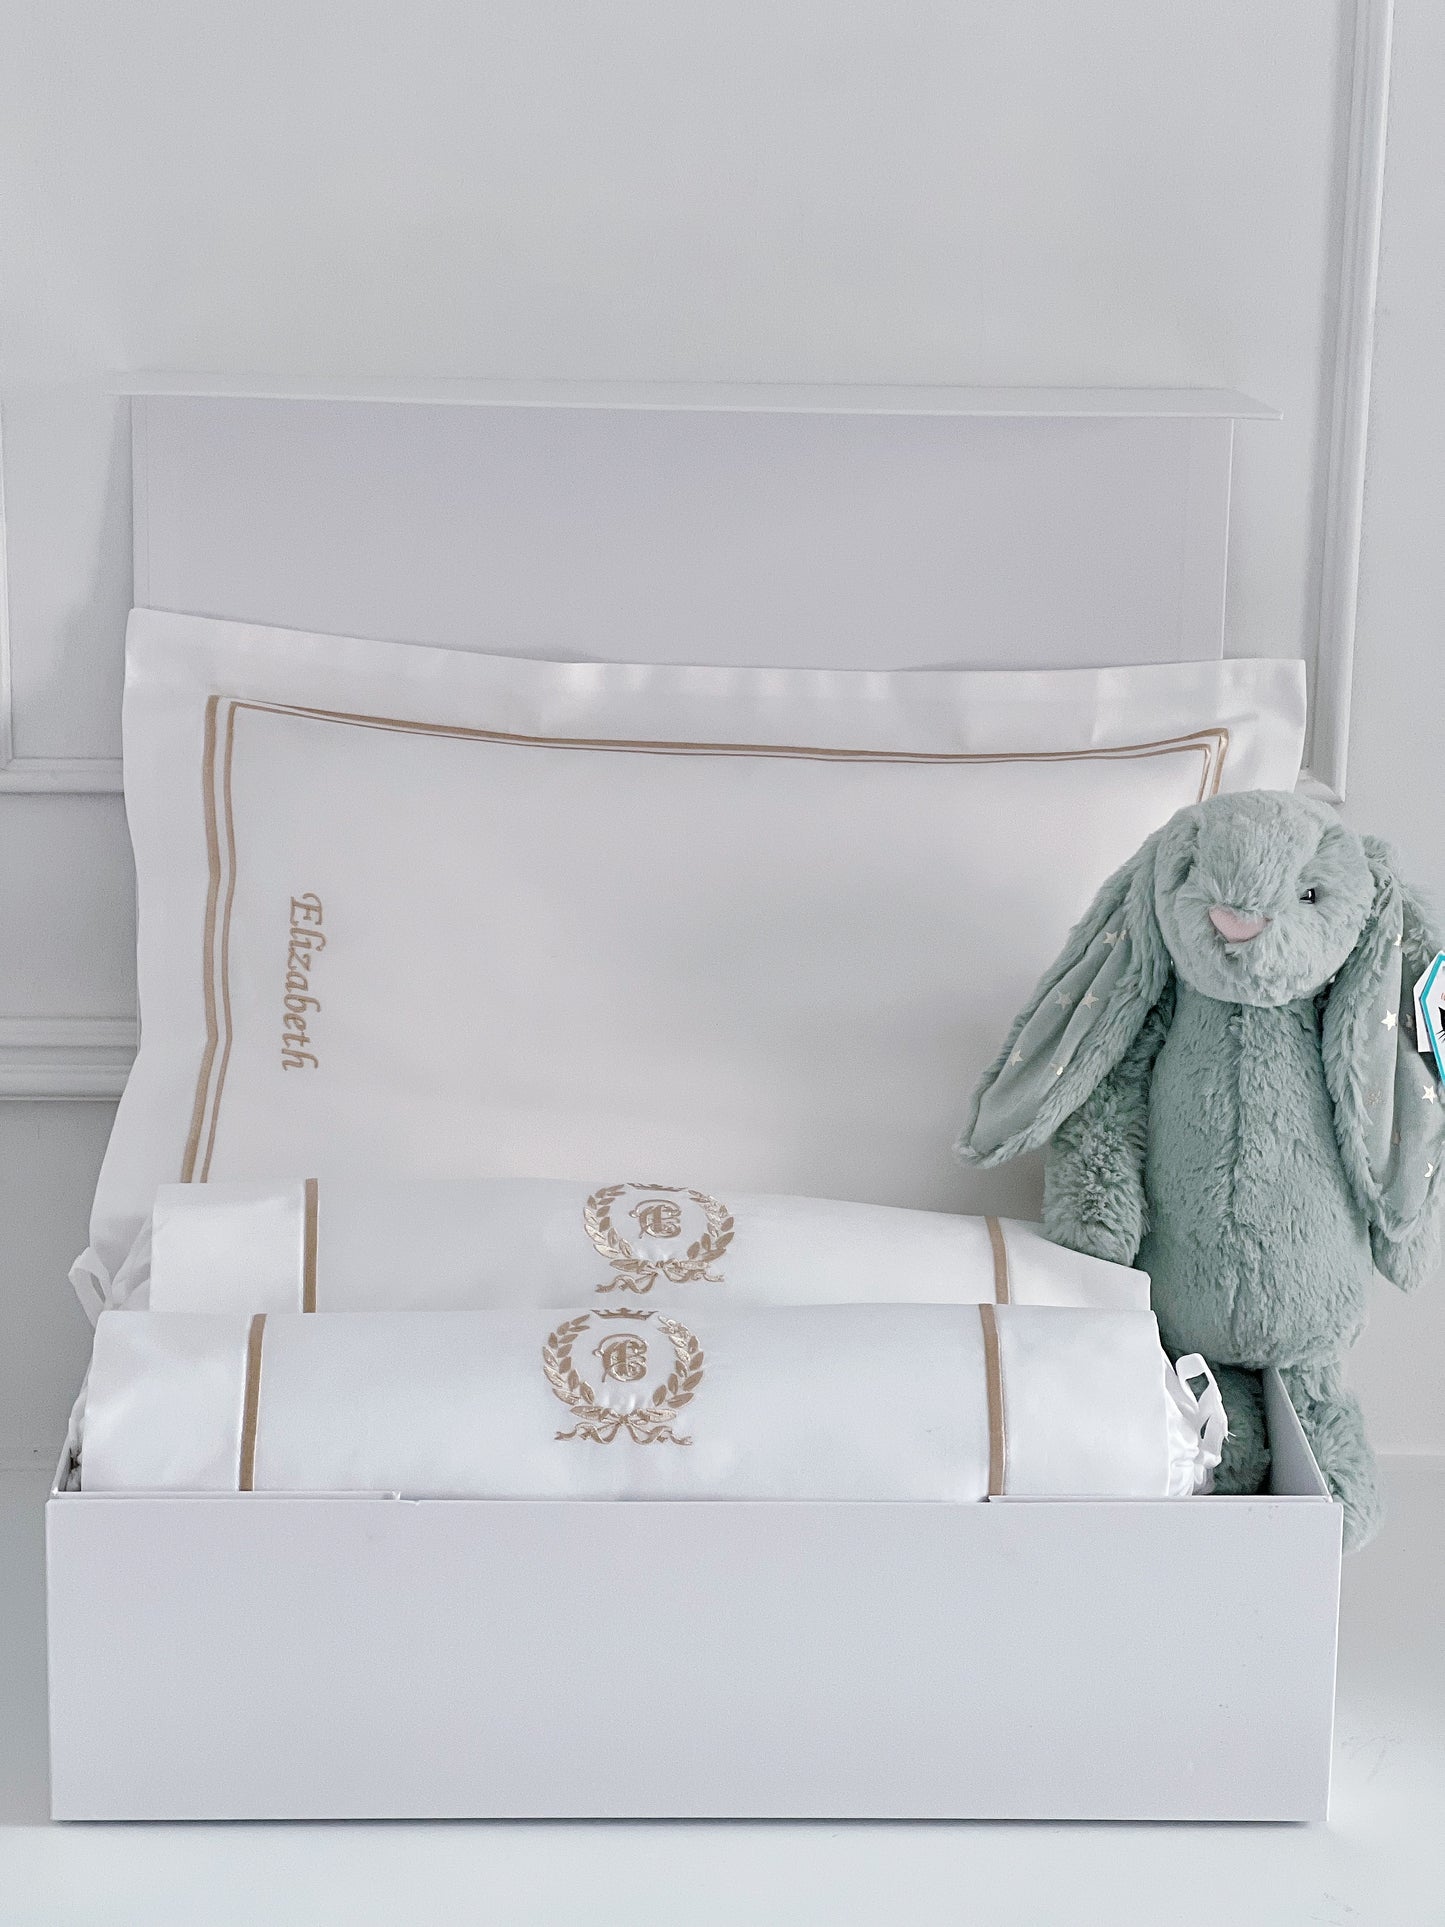 Jellycat Bashful Sparklet Bunny Baby Gift Set with name customisation - Count & Countess Baby Beddings & Gifts